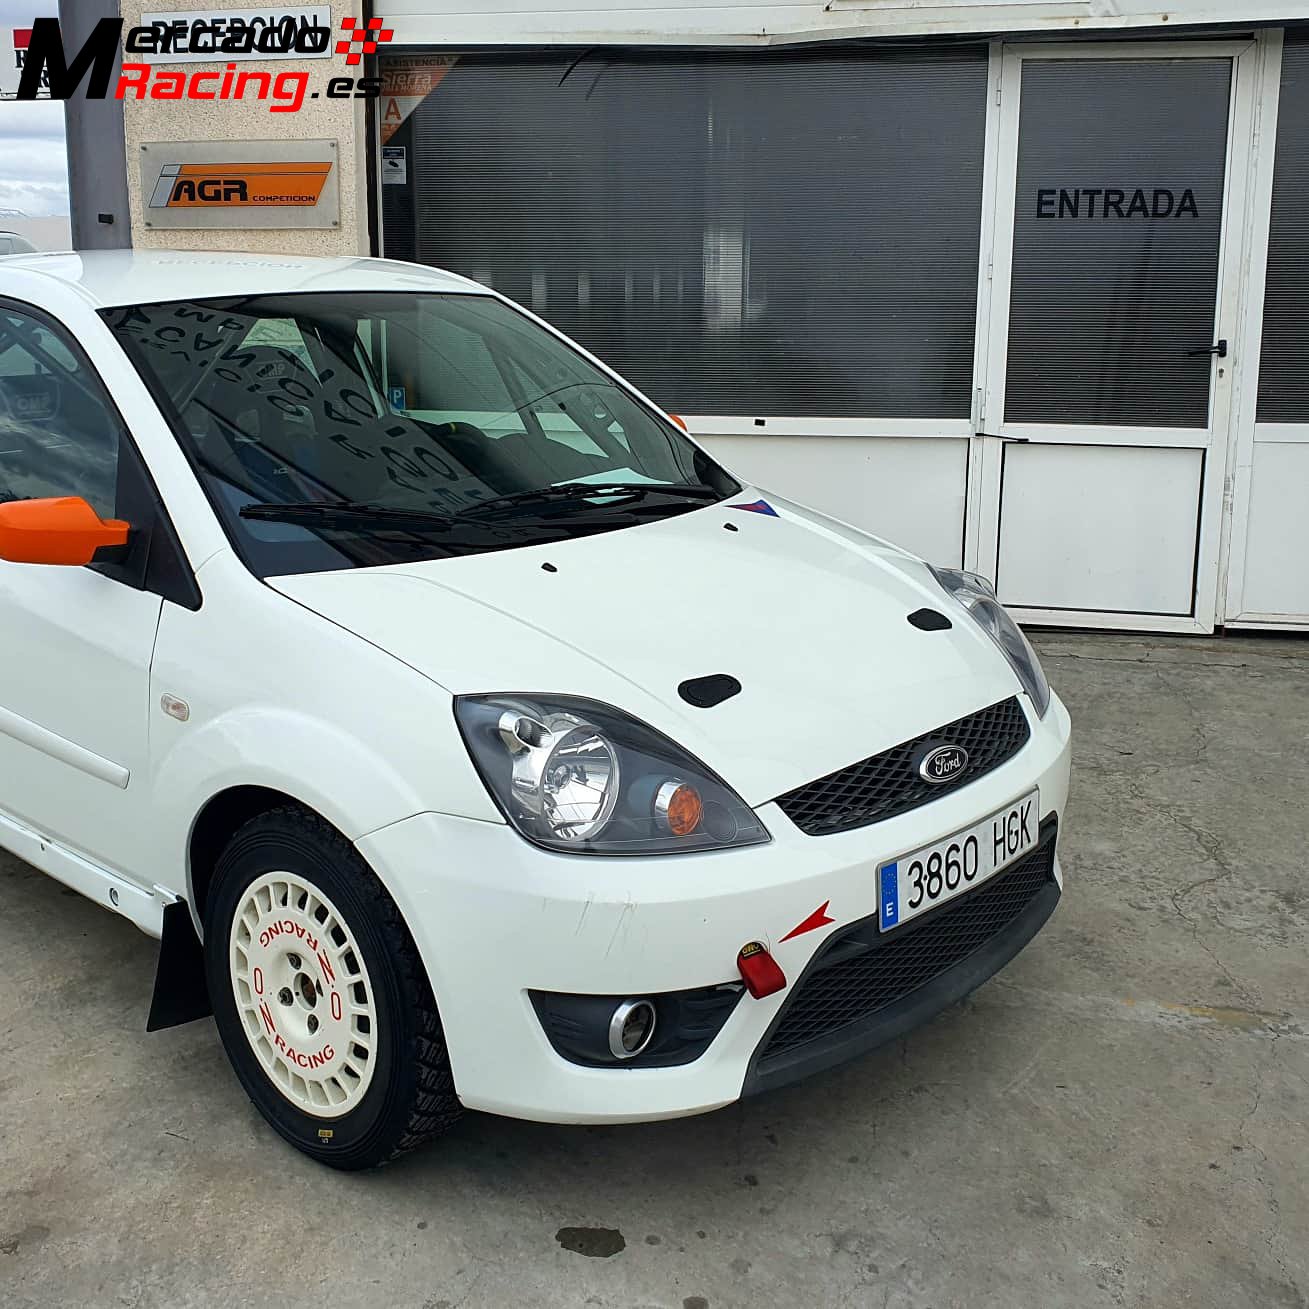 Agr competición alquila ford fiesta st gr.n